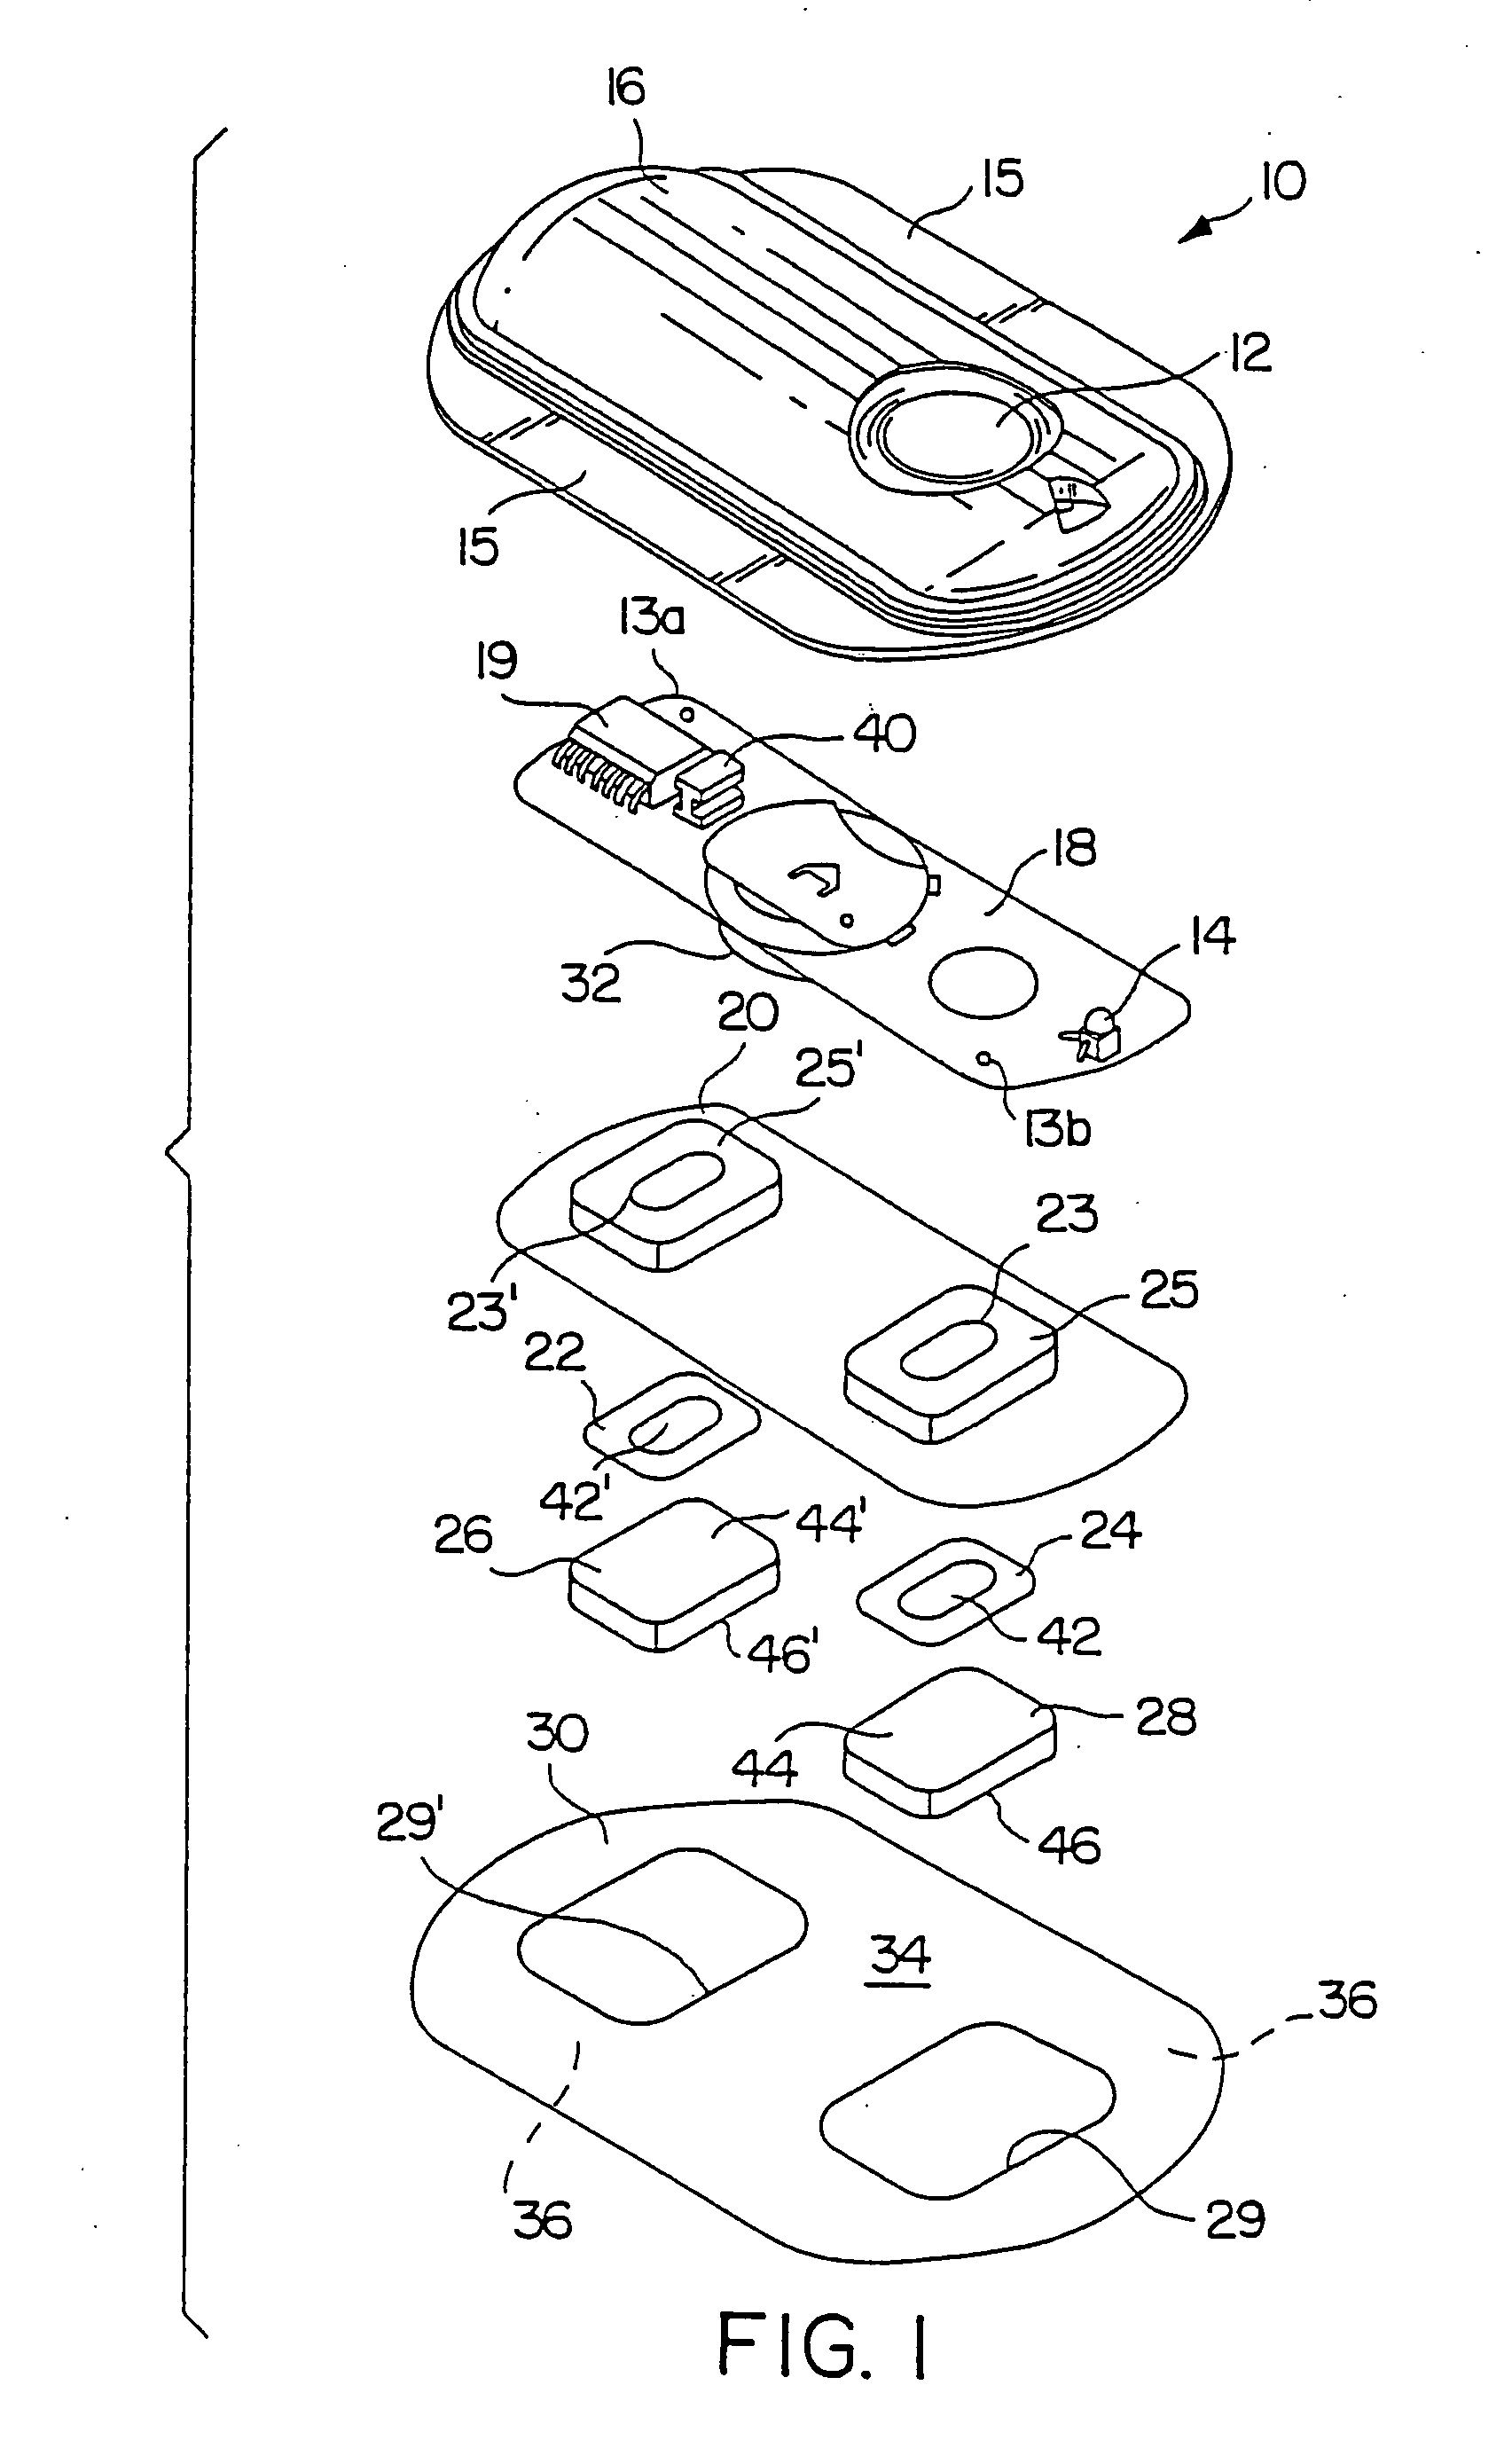 Method of making a housing for drug delivery